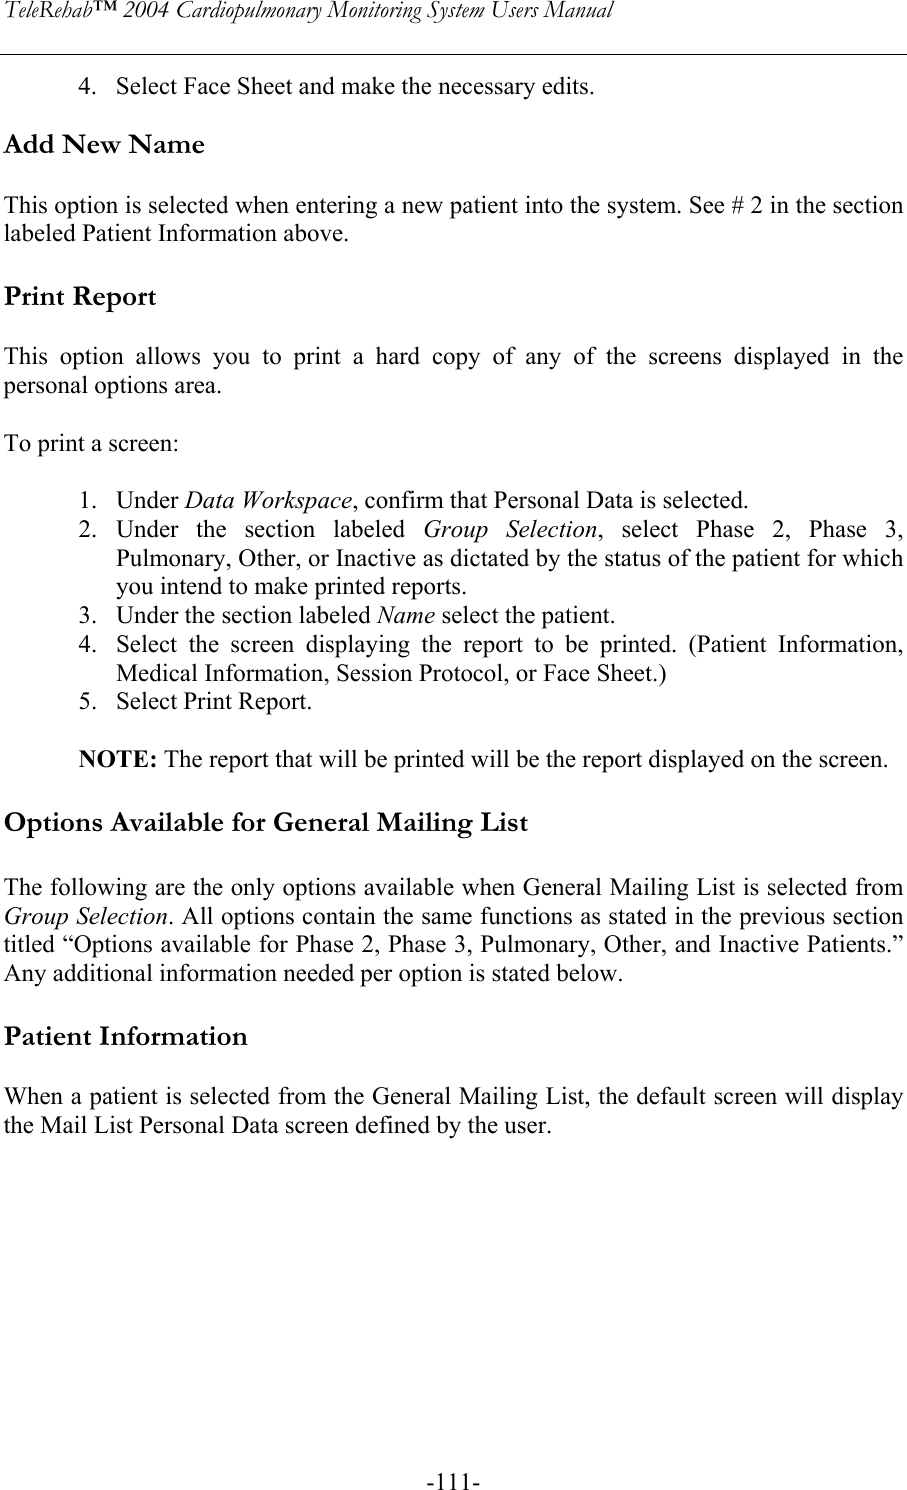 TeleRehab™ 2004 Cardiopulmonary Monitoring System Users Manual    -111-4. Select Face Sheet and make the necessary edits.  Add New Name  This option is selected when entering a new patient into the system. See # 2 in the section labeled Patient Information above.  Print Report  This option allows you to print a hard copy of any of the screens displayed in the personal options area.  To print a screen:  1. Under Data Workspace, confirm that Personal Data is selected. 2. Under the section labeled Group Selection, select Phase 2, Phase 3, Pulmonary, Other, or Inactive as dictated by the status of the patient for which you intend to make printed reports.  3. Under the section labeled Name select the patient. 4. Select the screen displaying the report to be printed. (Patient Information, Medical Information, Session Protocol, or Face Sheet.) 5. Select Print Report.  NOTE: The report that will be printed will be the report displayed on the screen.    Options Available for General Mailing List  The following are the only options available when General Mailing List is selected from Group Selection. All options contain the same functions as stated in the previous section titled “Options available for Phase 2, Phase 3, Pulmonary, Other, and Inactive Patients.” Any additional information needed per option is stated below.  Patient Information  When a patient is selected from the General Mailing List, the default screen will display the Mail List Personal Data screen defined by the user.  